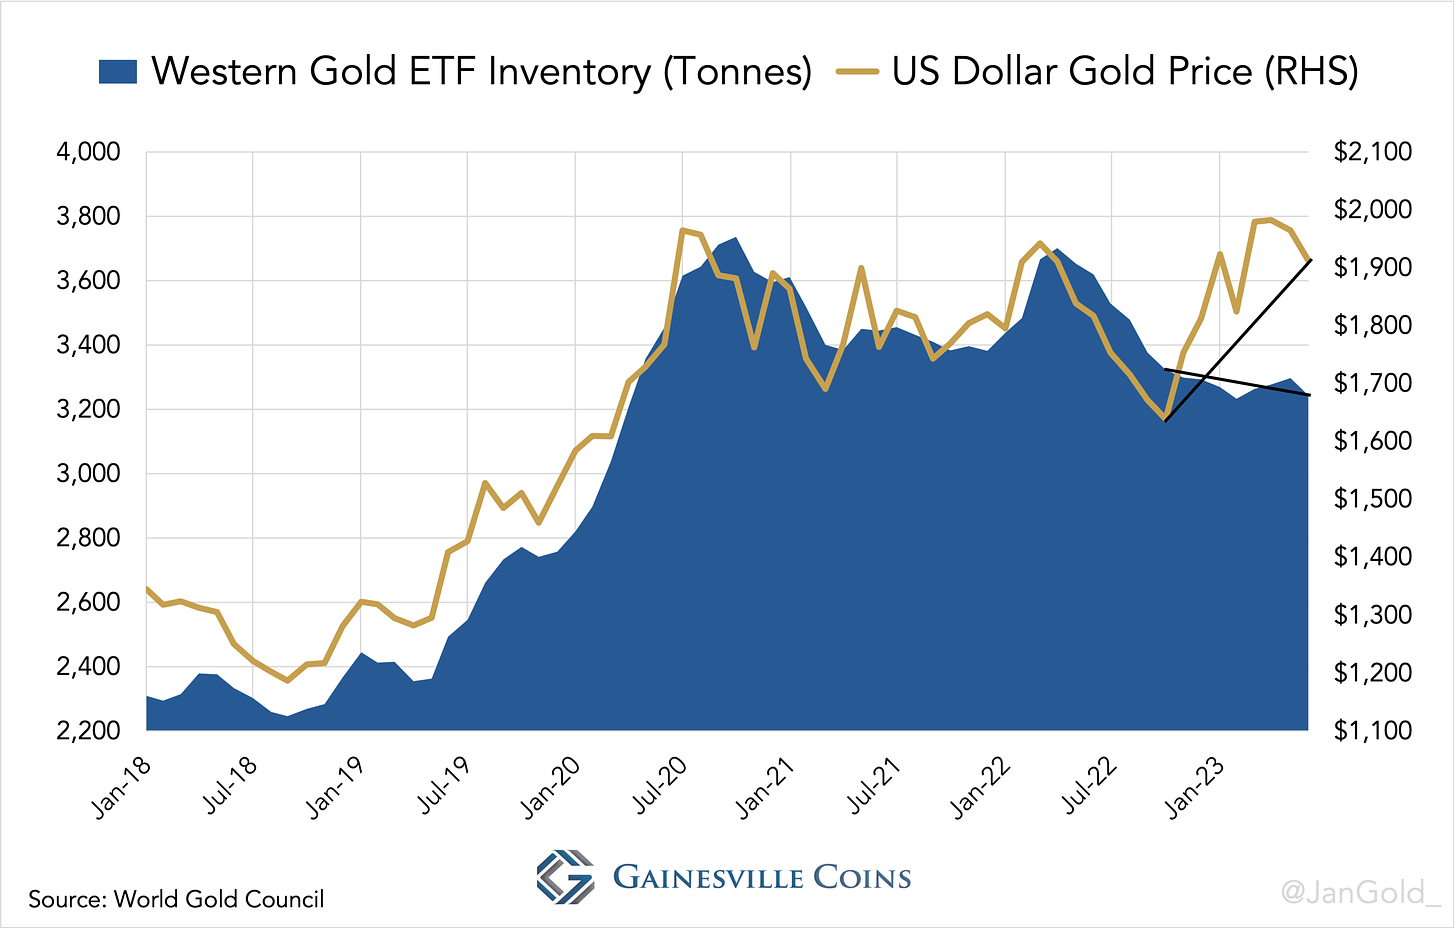 chart showing Western Gold ETF inventory